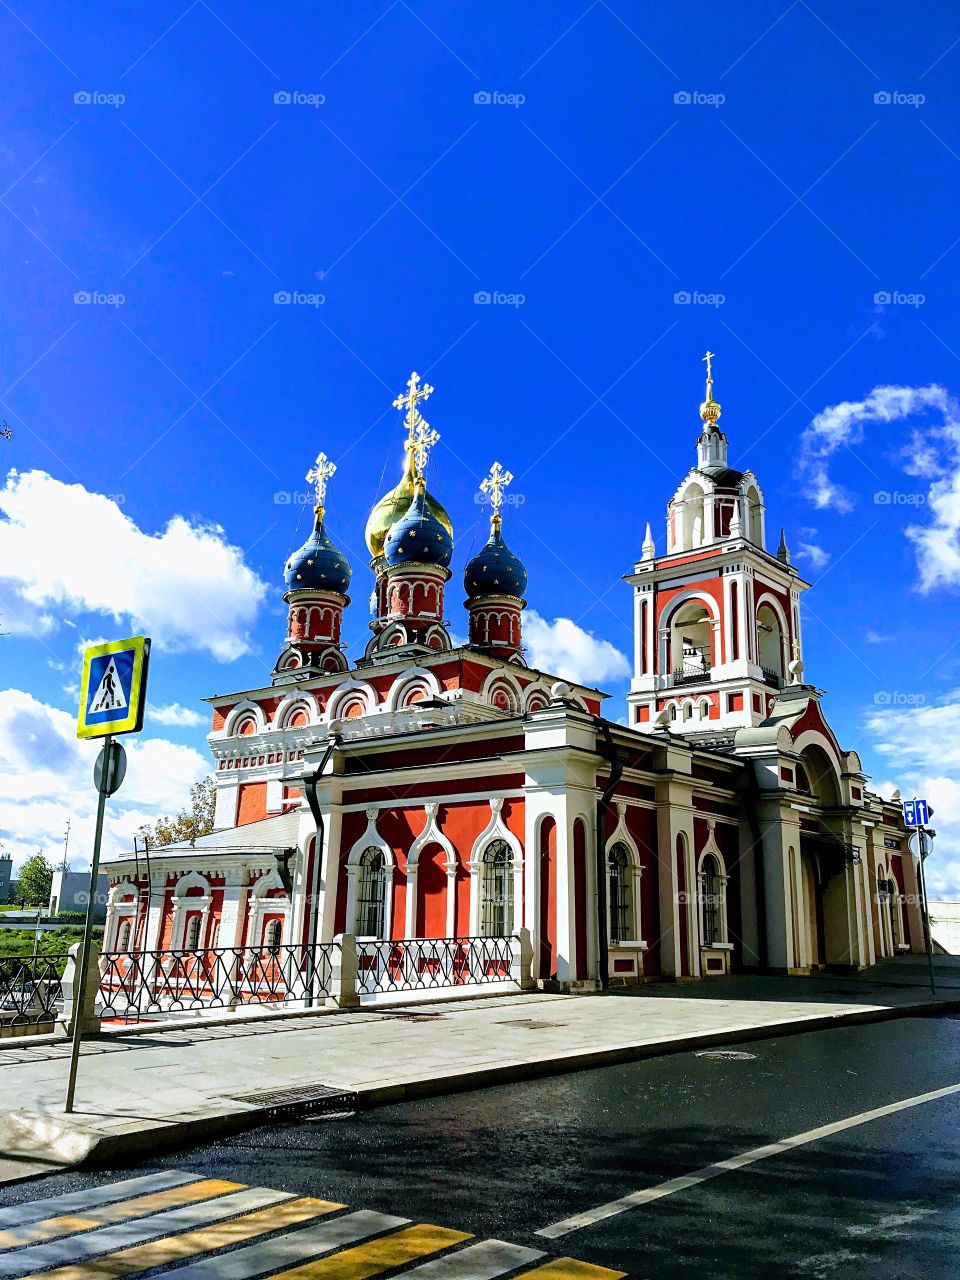 The Moscow Temple